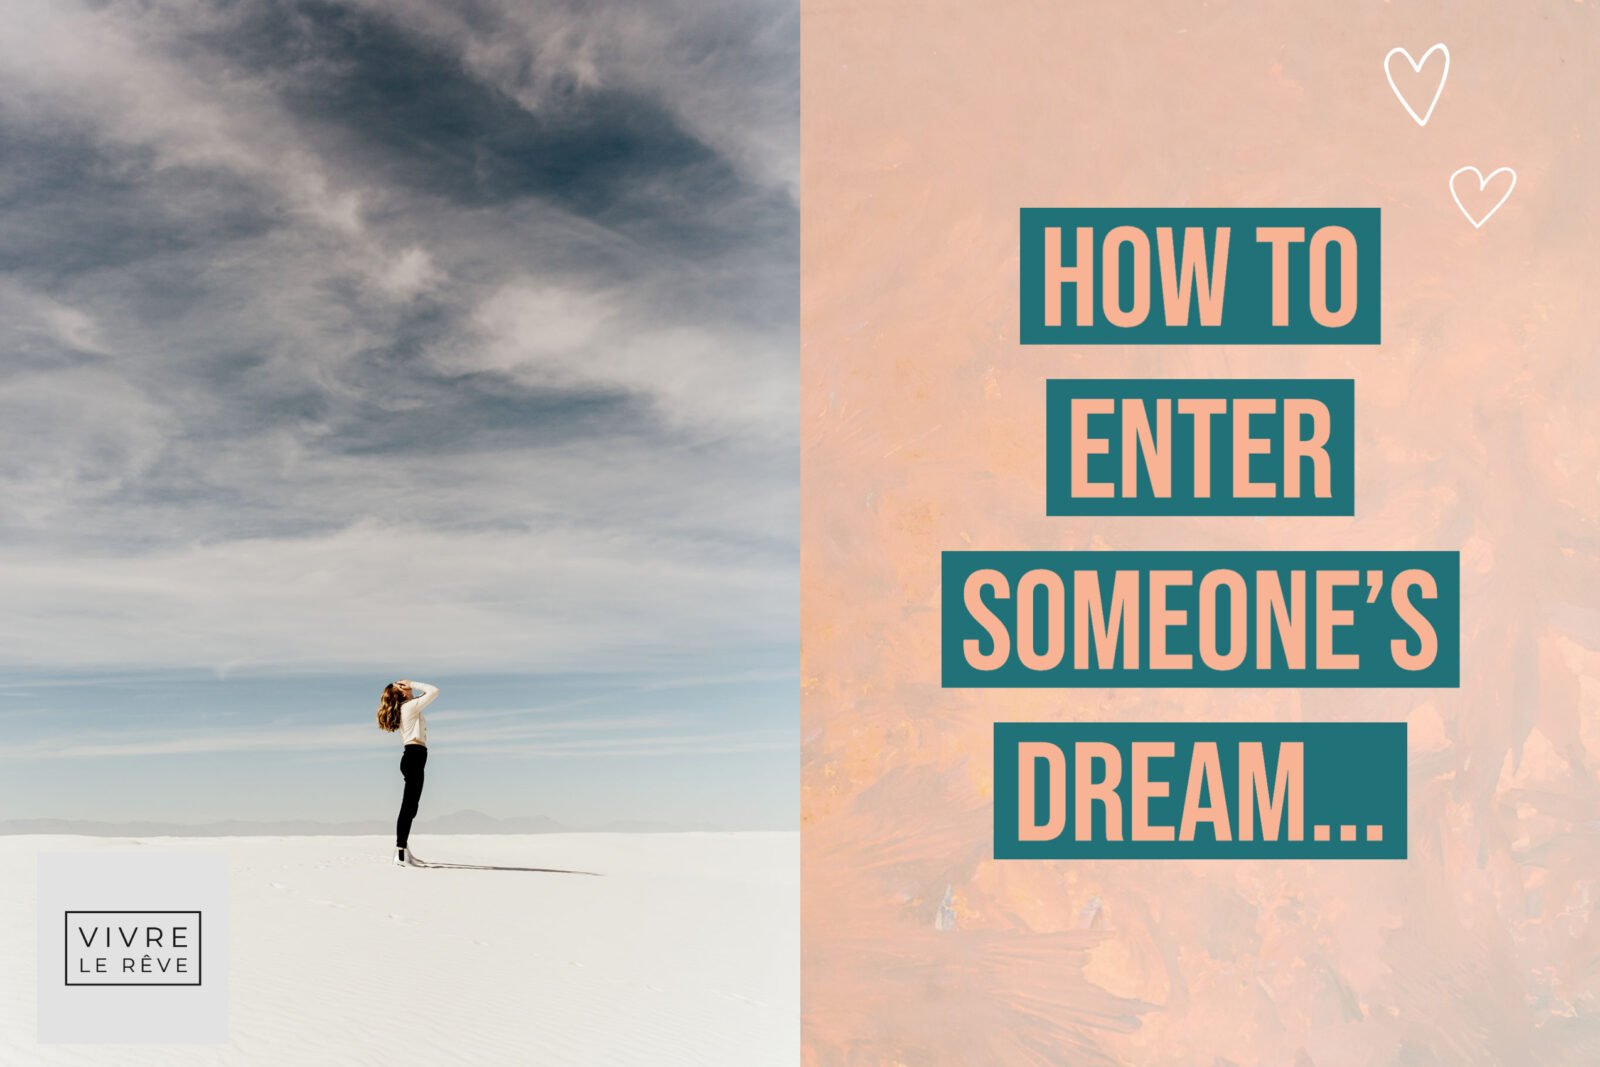 How to Enter Someone's Dream...